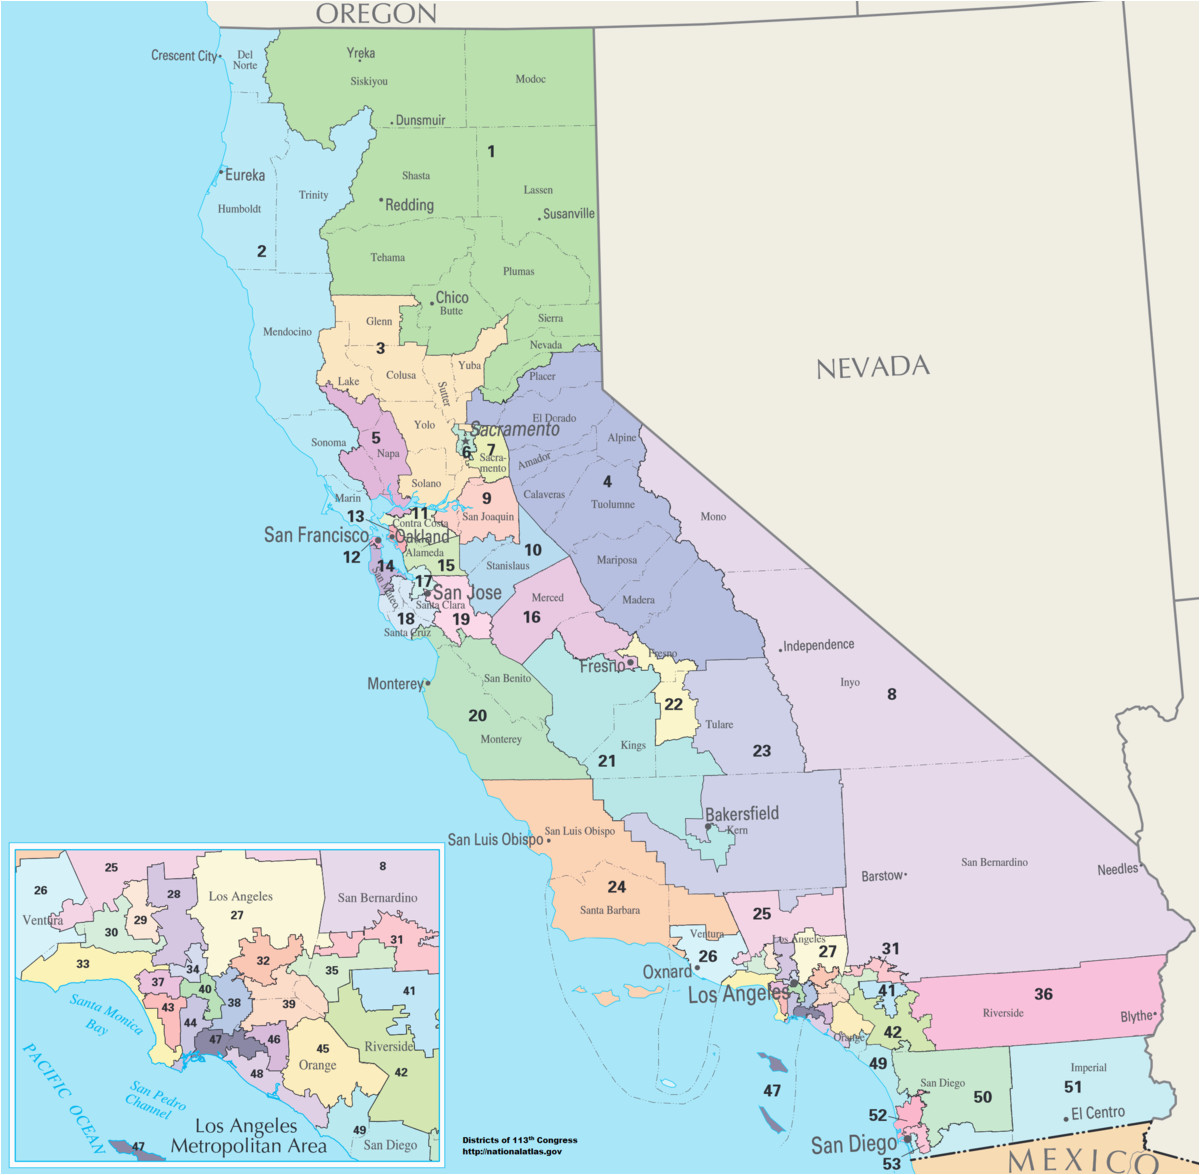 California Assembly Districts Map California S Congressional Districts Wikipedia Of California Assembly Districts Map 